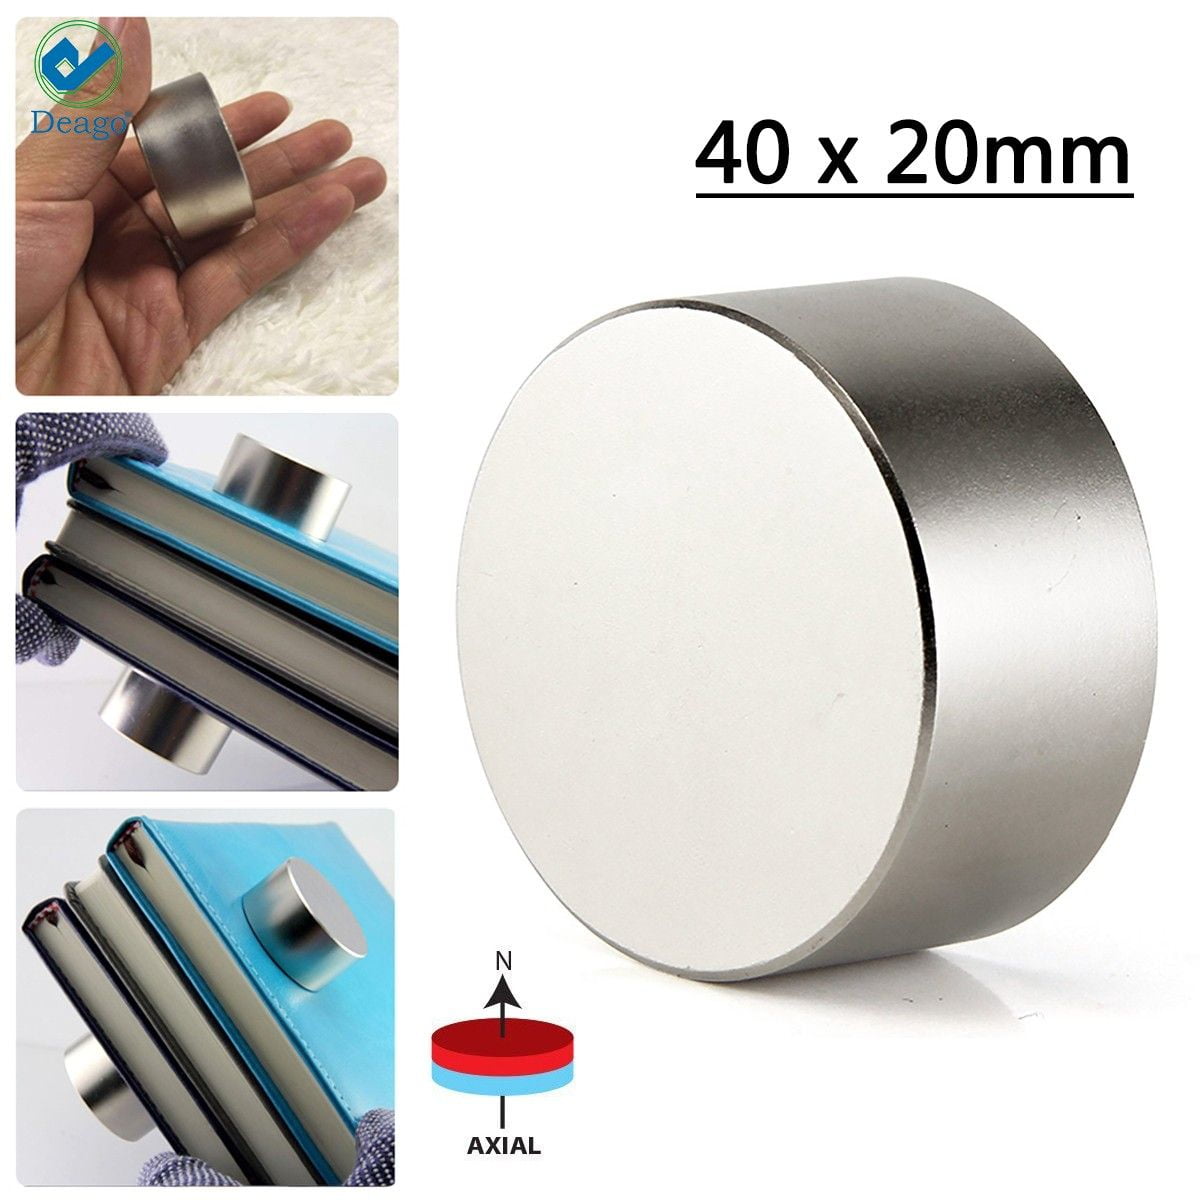 Deago 40x20mm Super Strong Neodymium Rare Earth Disc Magnet, Permanent  Magnet Disc, N52 Most Powerful Round Magnets - One Piece